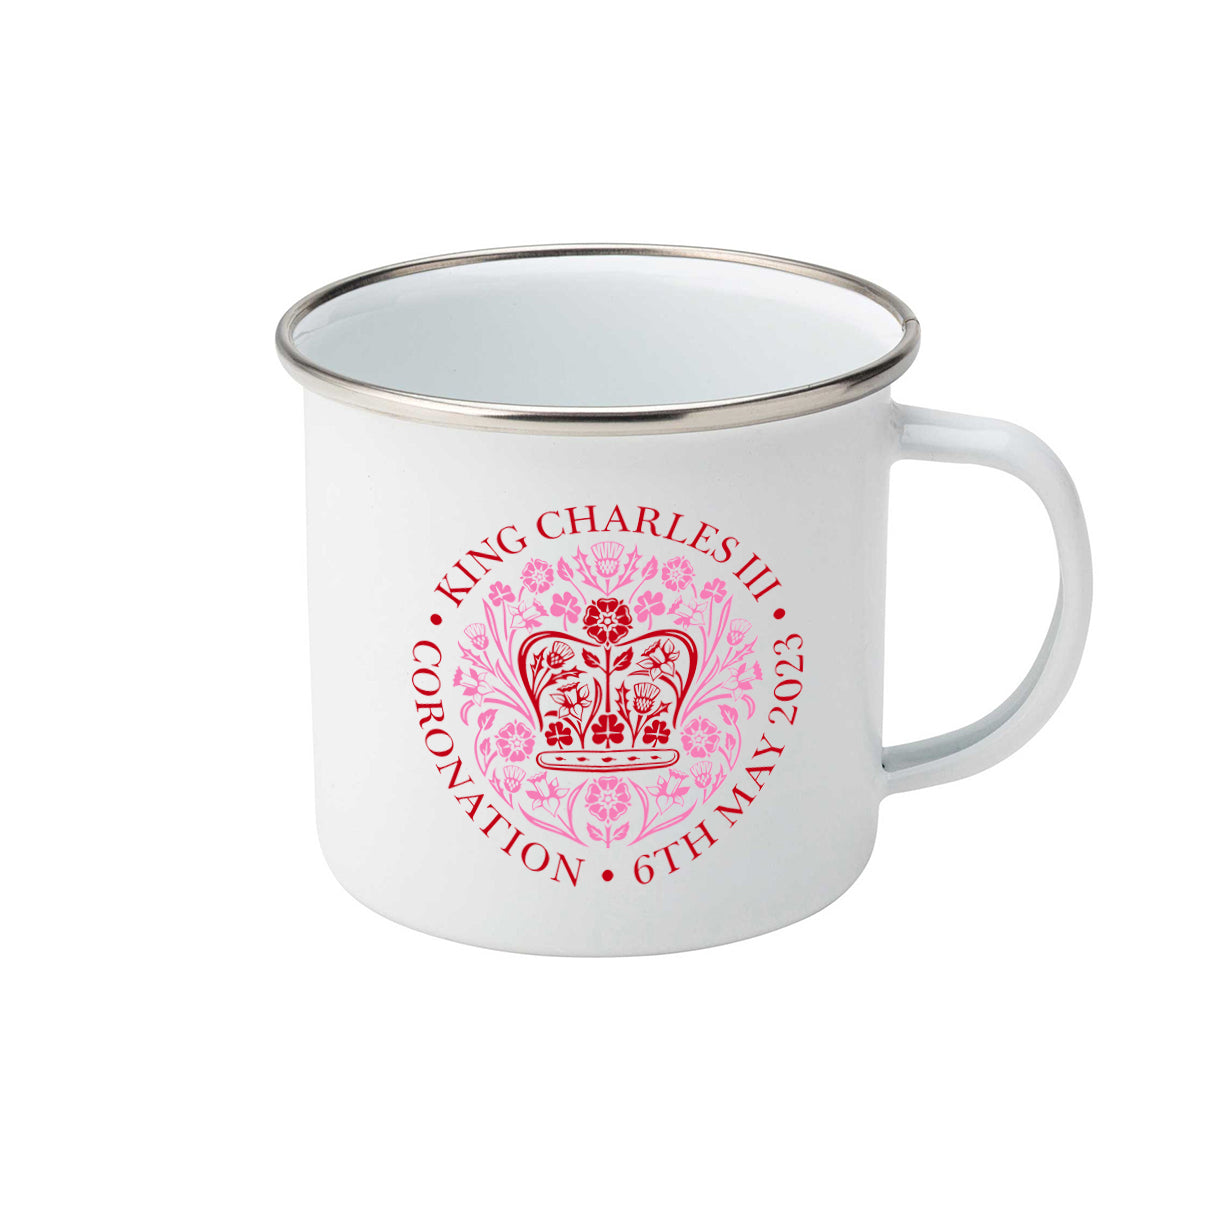 Official Emblem of The Coronation of King Charles III – 6th May 2023 | Enamel mug | Red